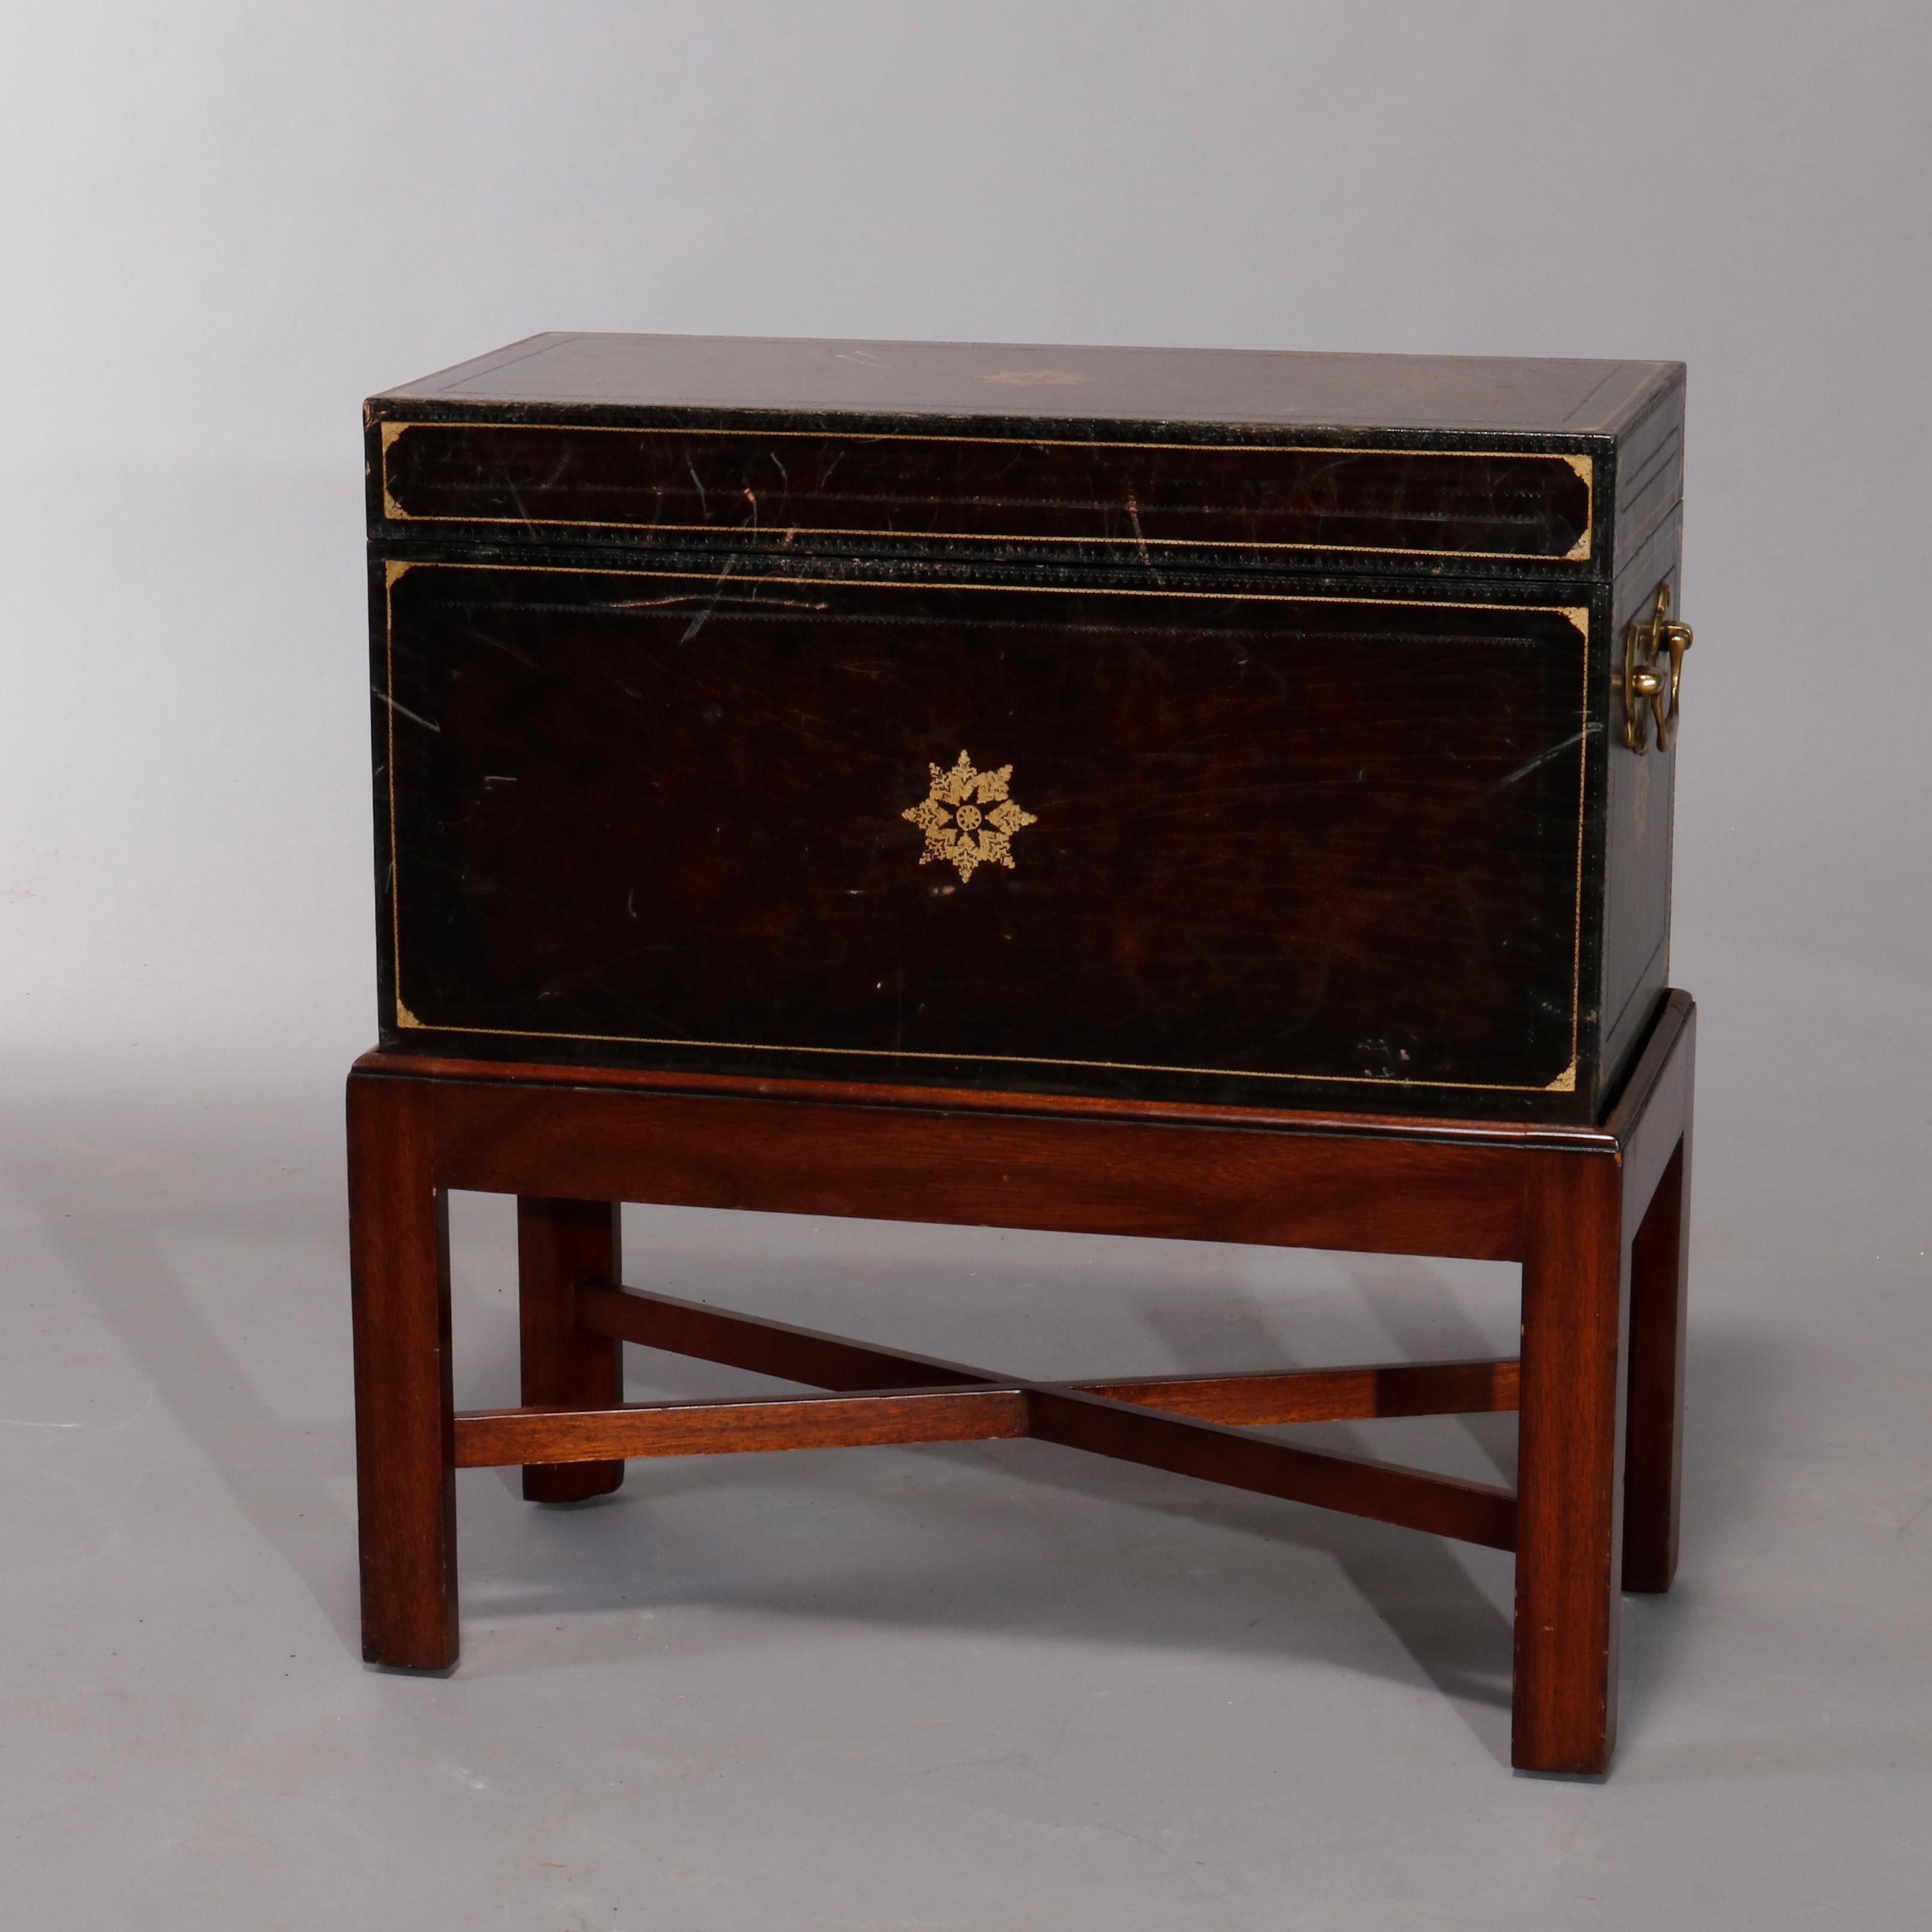 A vintage Continental dowry or document box offers leather covering with gilt banding with central stylized stars, cast brass handles, and covered interior, seated on mahogany stand with straight legs and cross stretcher, 20th century.

Measures: